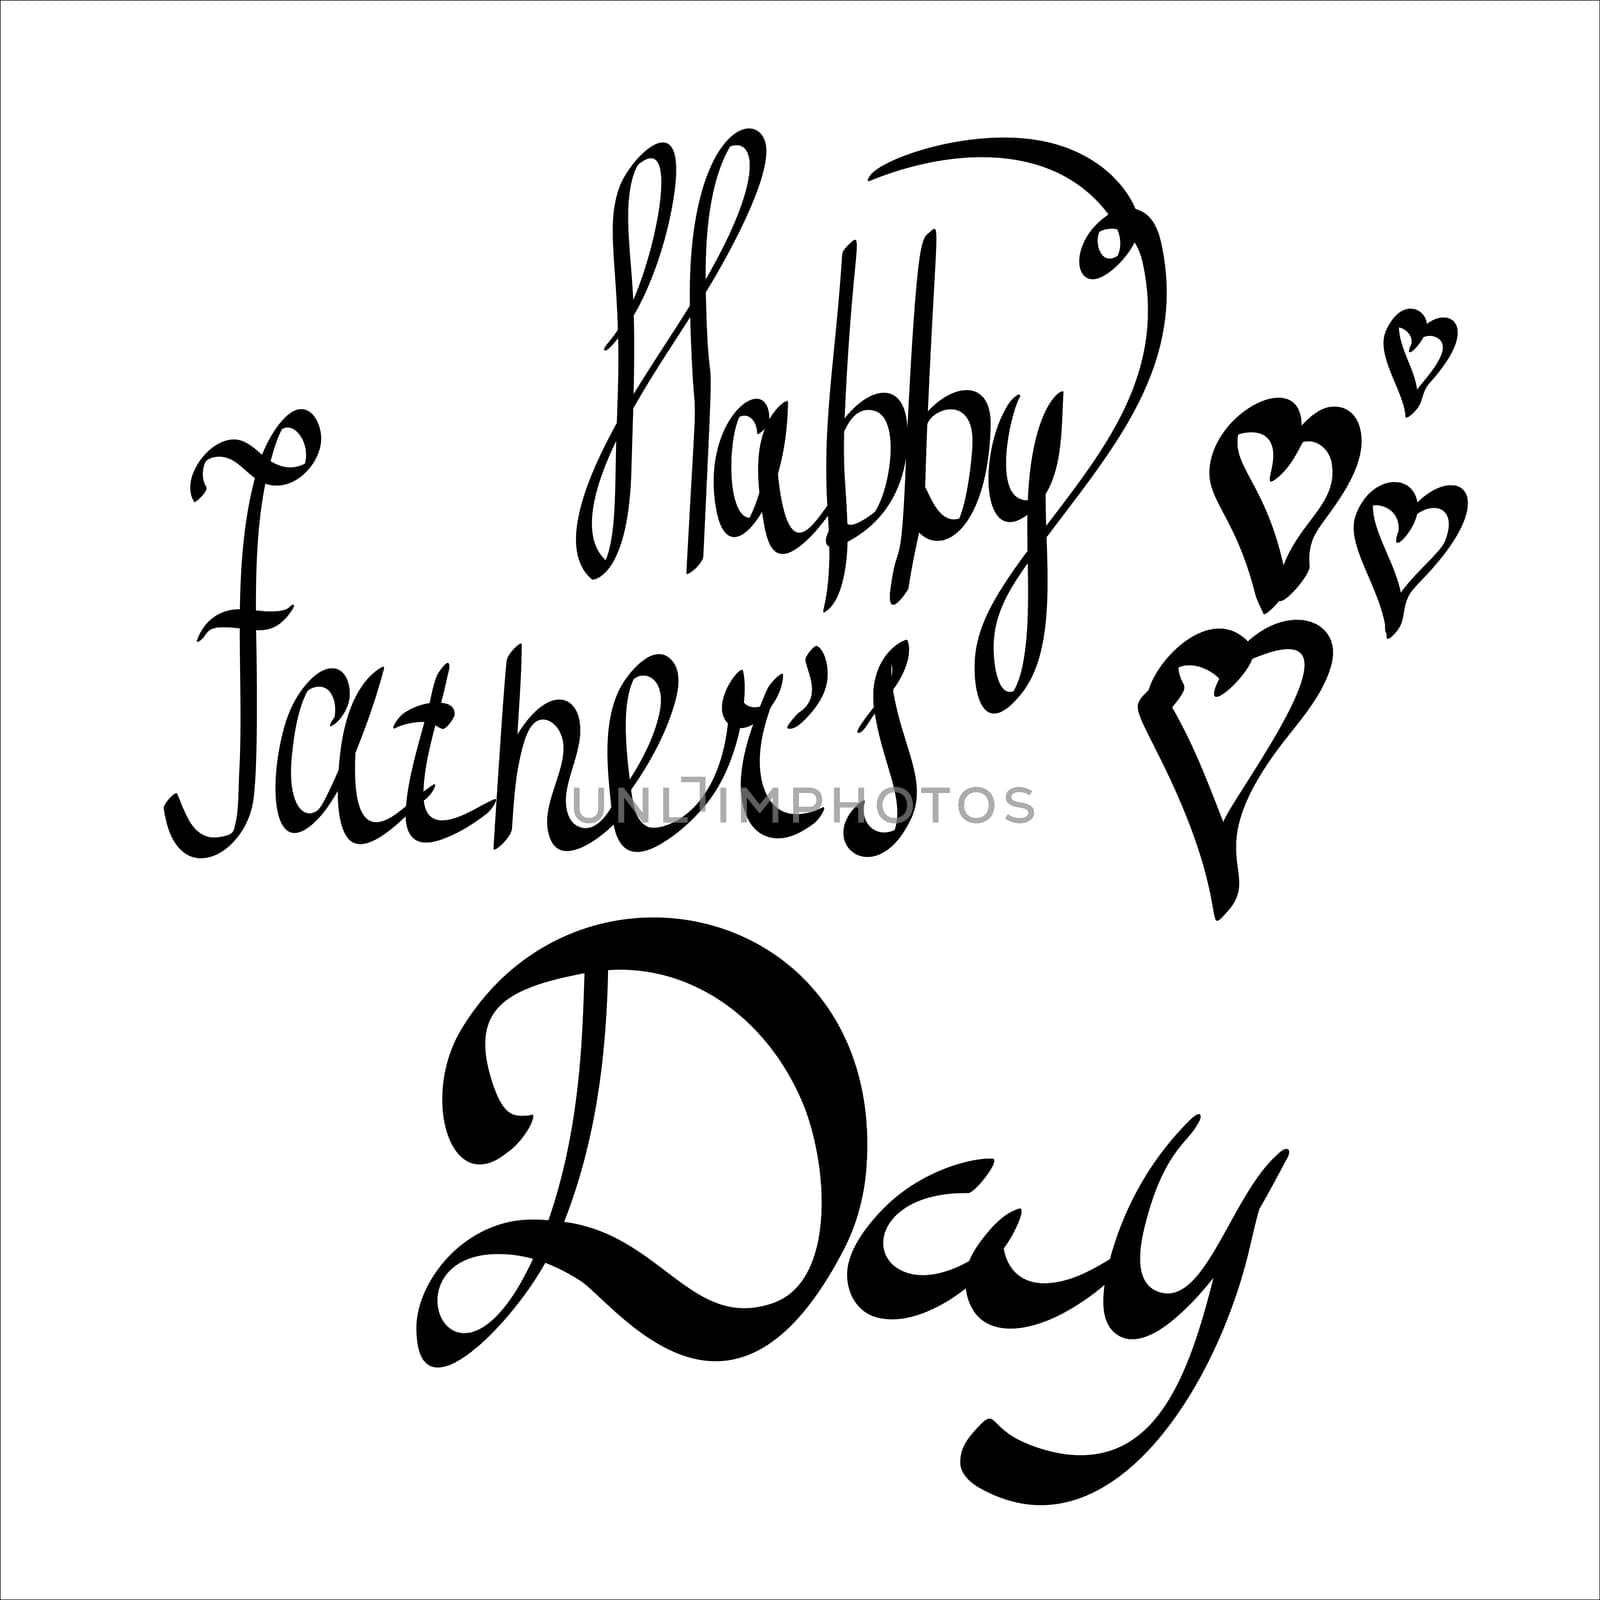 Happy Fathers Day with Hearts. hand-written lettering, t-shirt print design, typographic composition isolated on white background. by skrotov